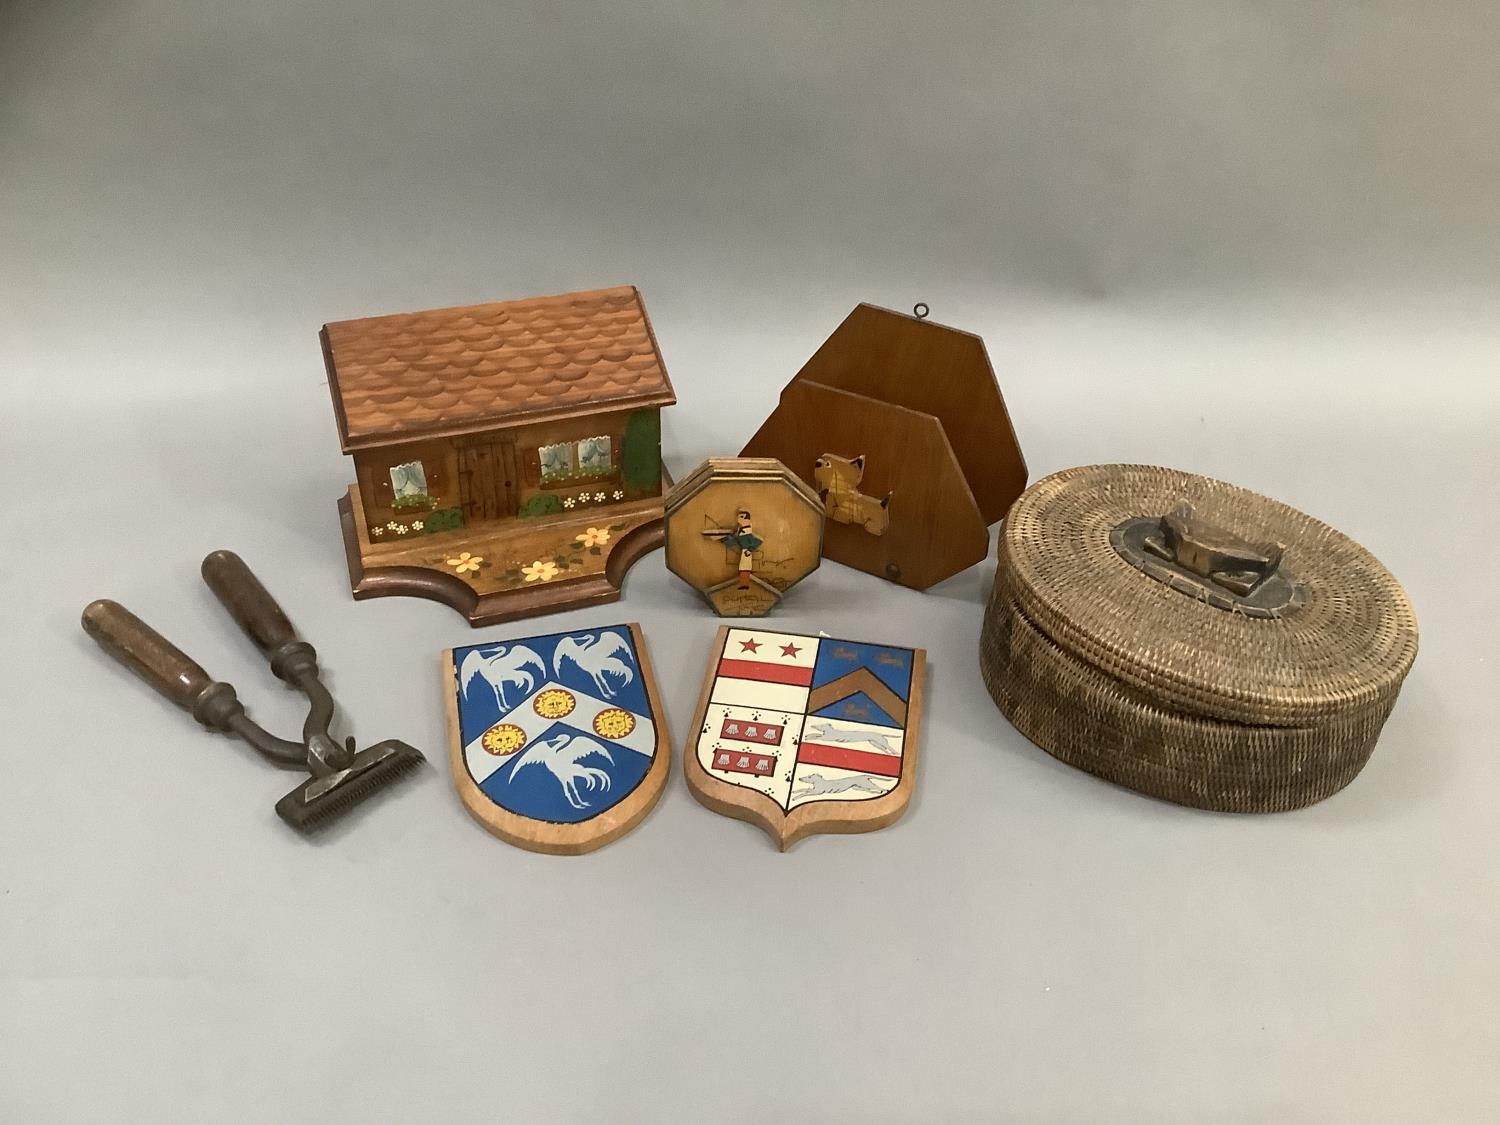 A wooden letterbox with pen slide in the form of a house, a pair of painted shields, a set of